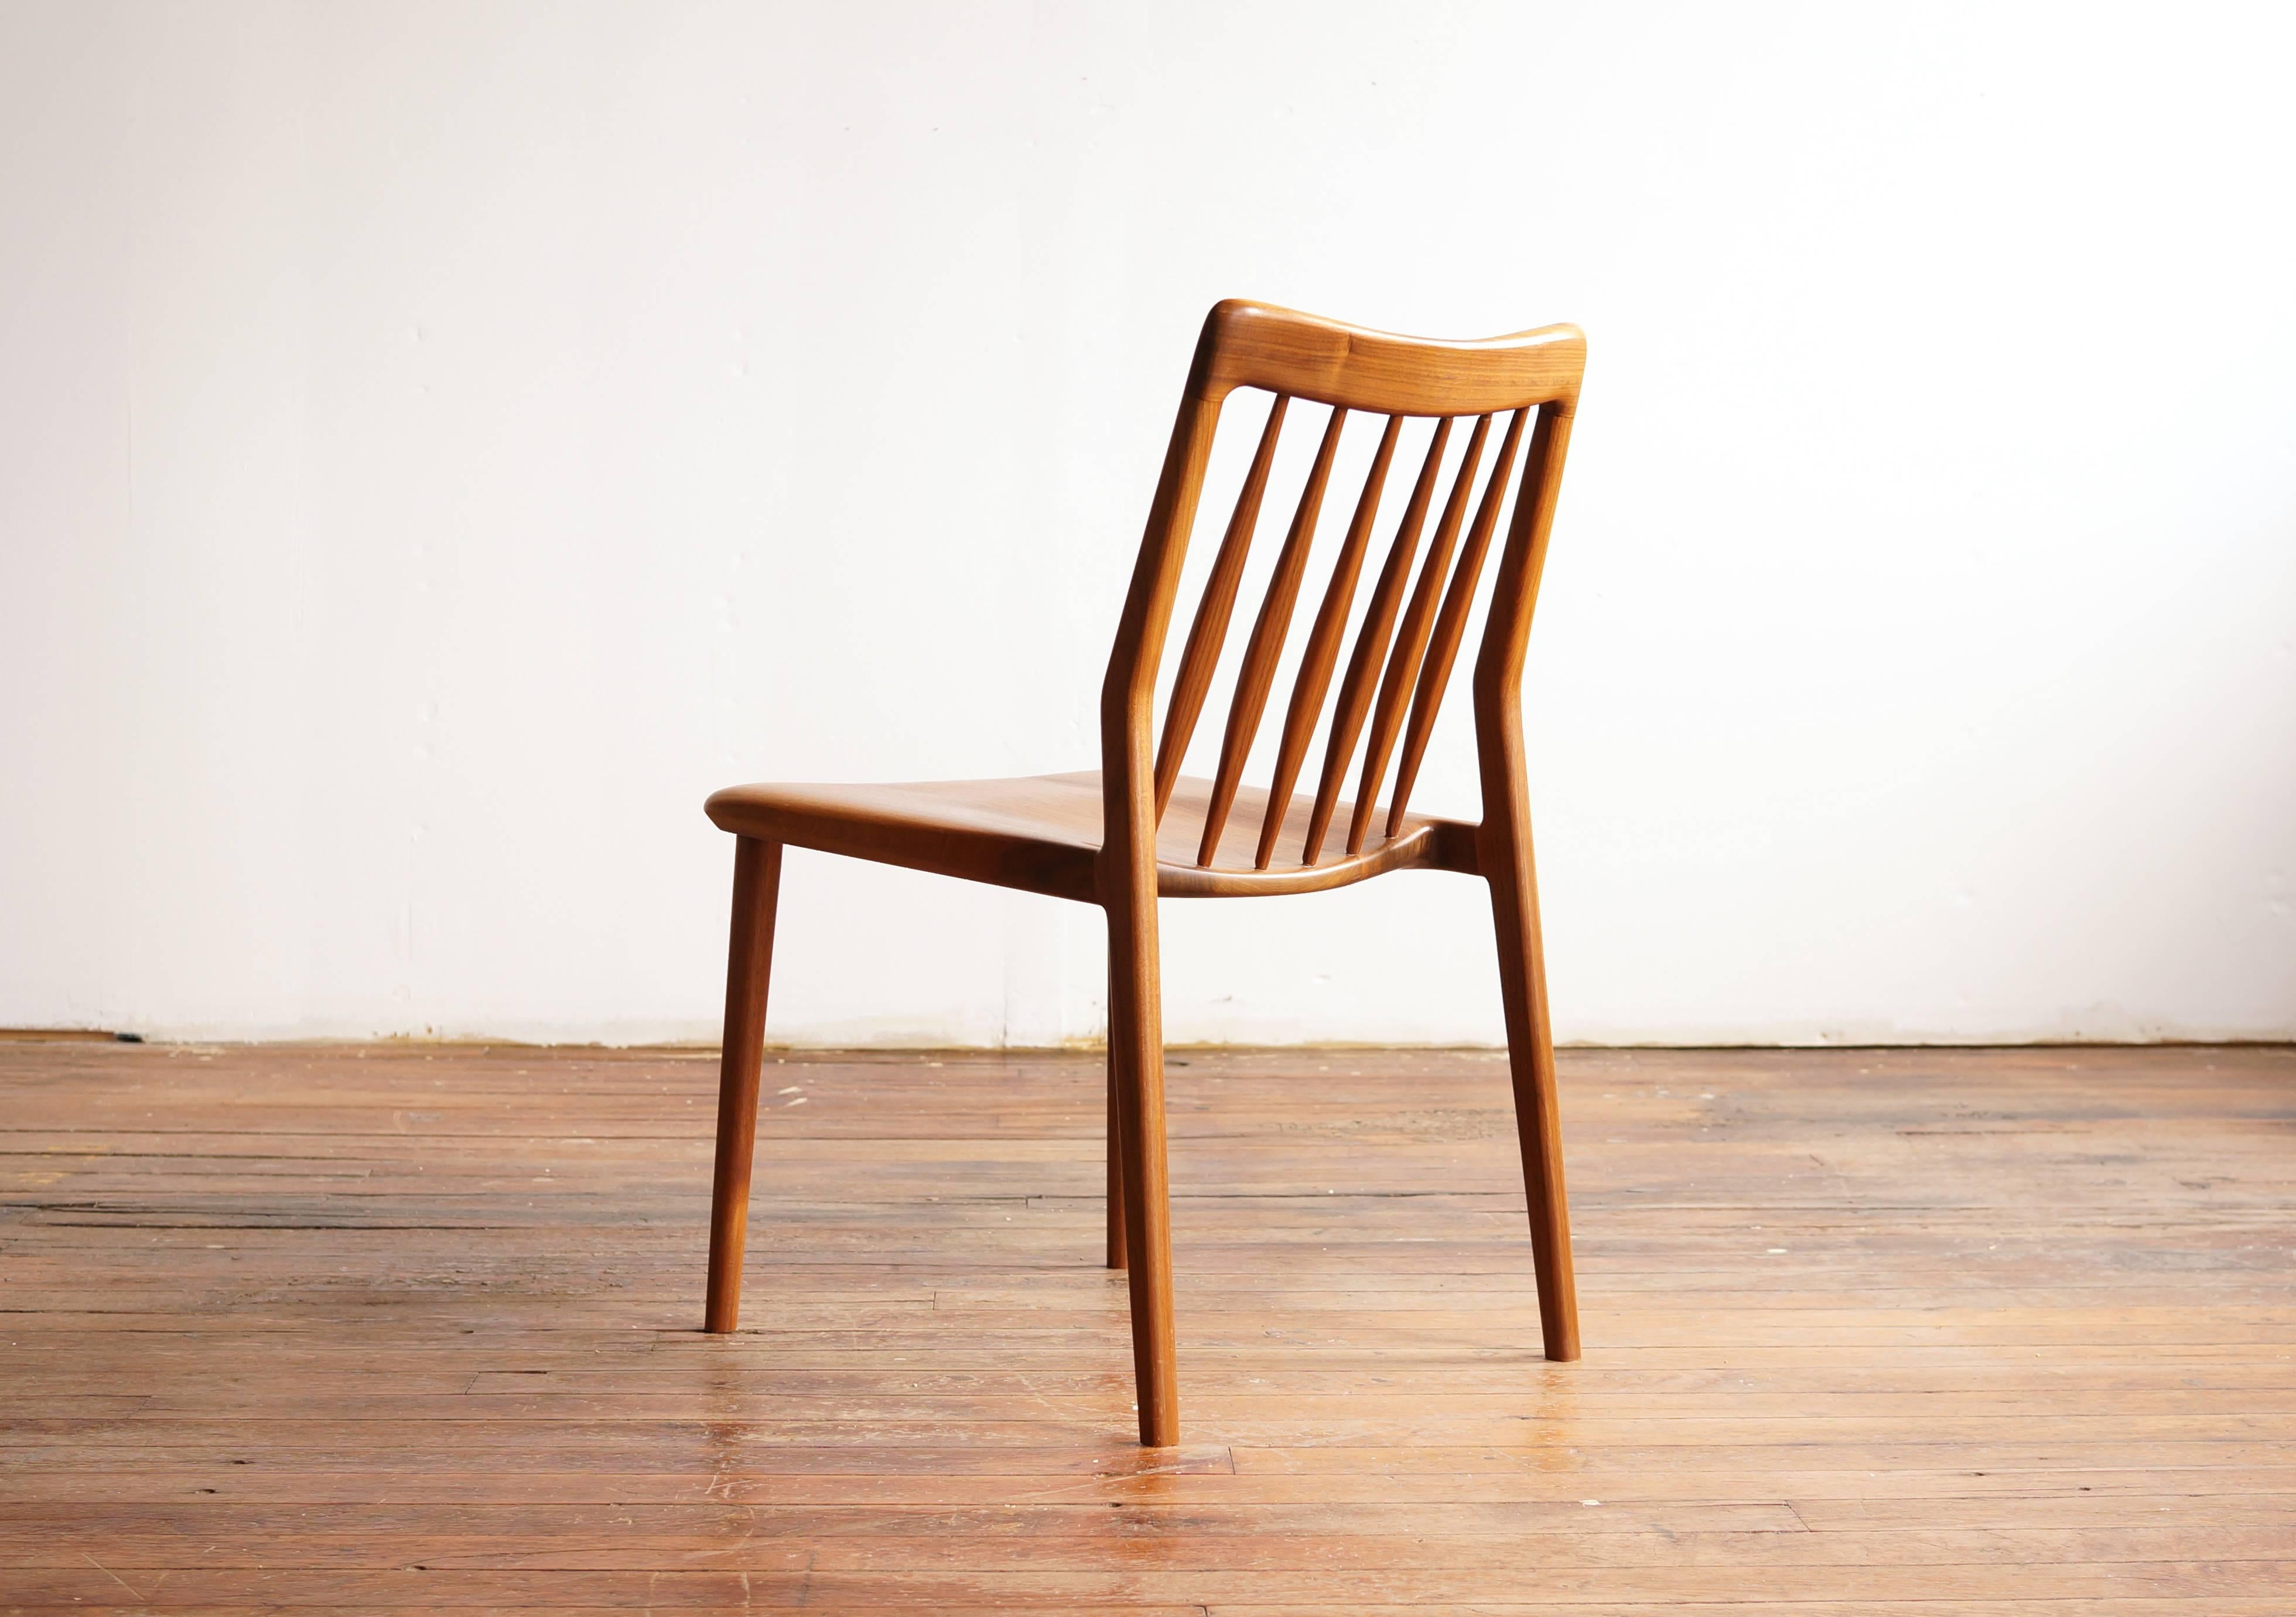 The C04 dining chair, in solid American black walnut. The design references Windsor chair tradition - with the hand scooped seat and the back rest of carefully shaped and angled spindles - but taken in a more modern, organic direction. 

Handmade to